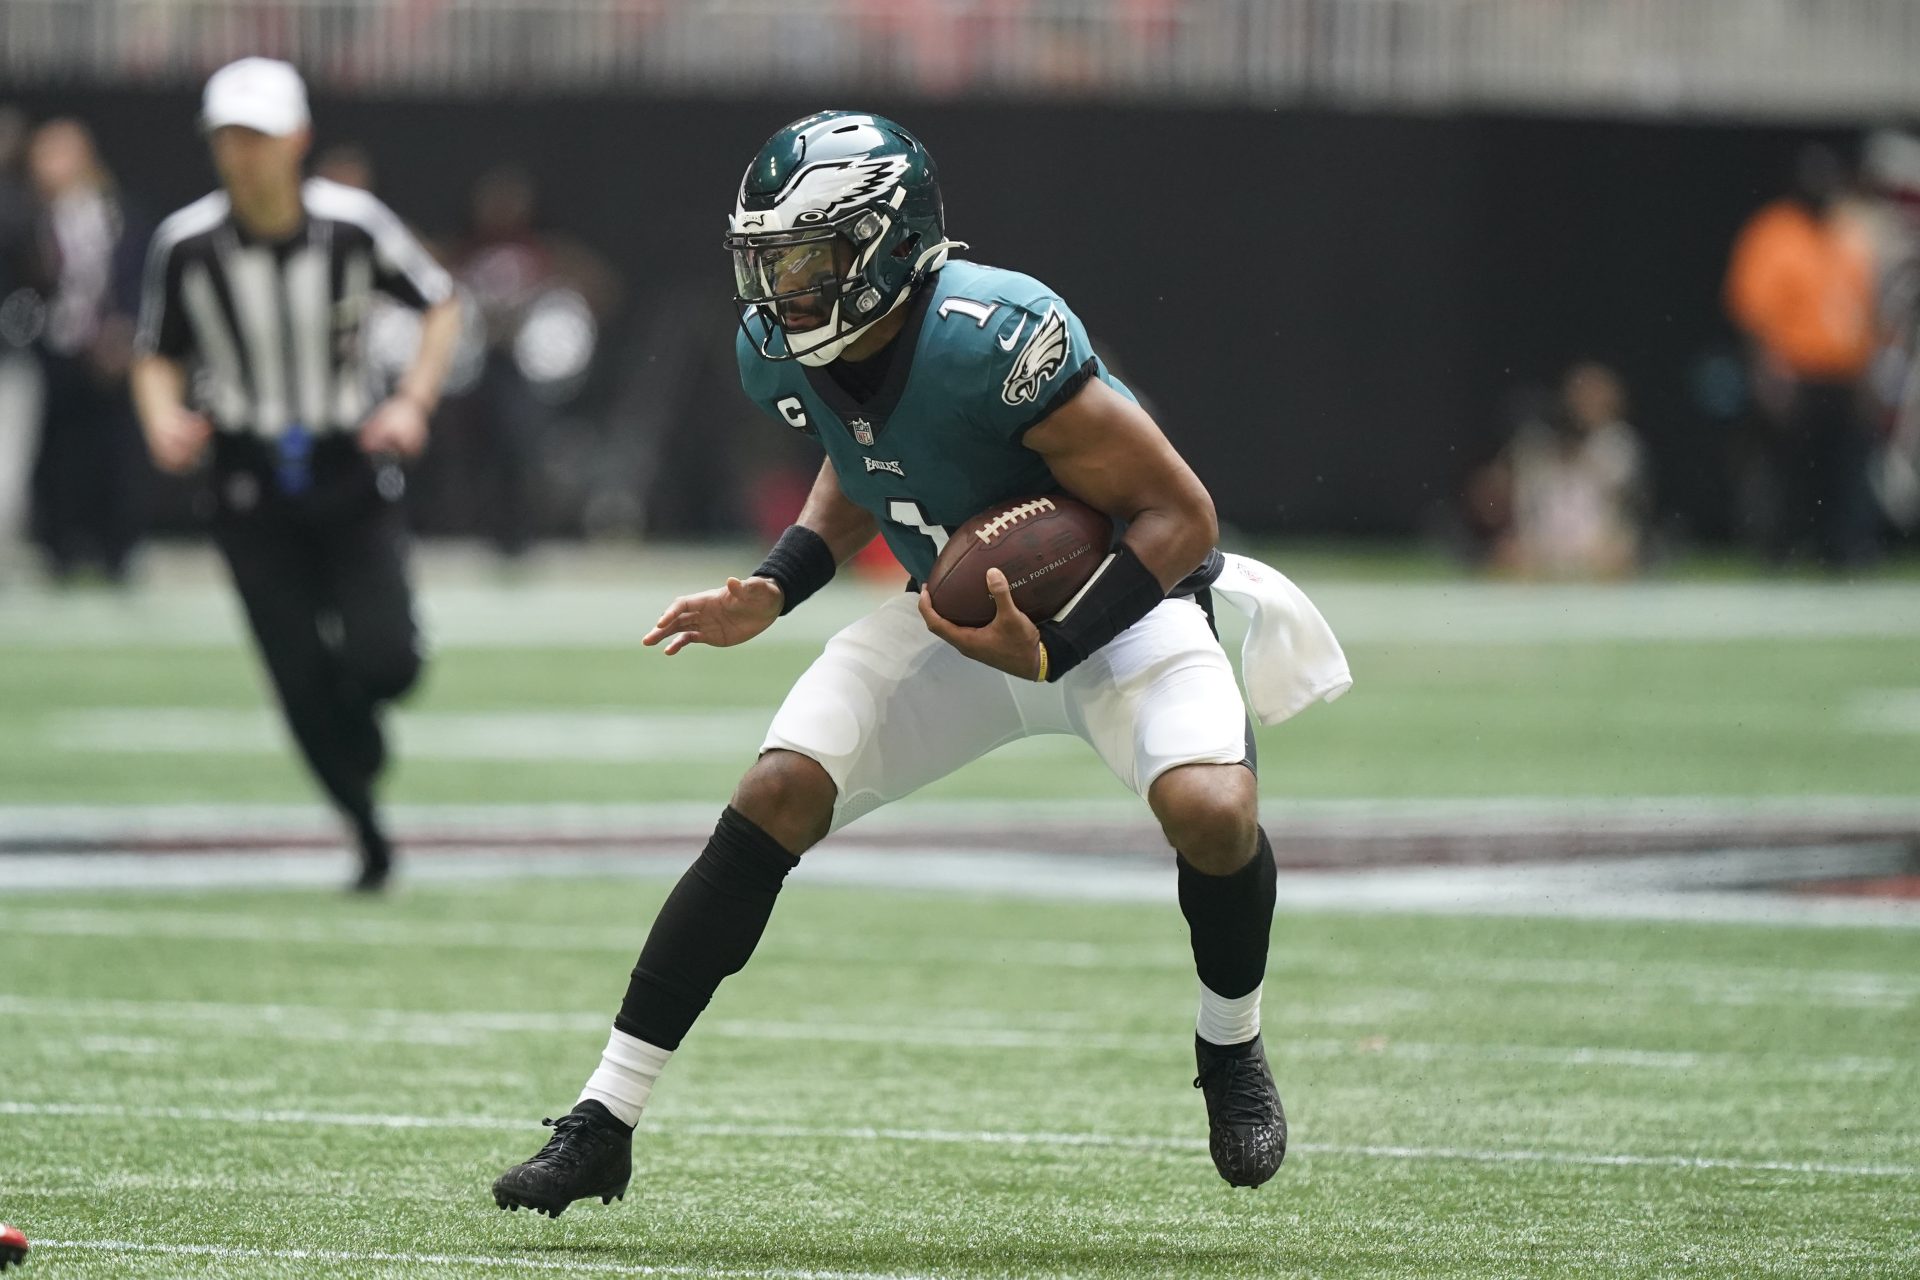 Eagles’ Jalen Hurts Rises to No. 2 in NFL Jersey Gross sales After 500% Spike in Week 1